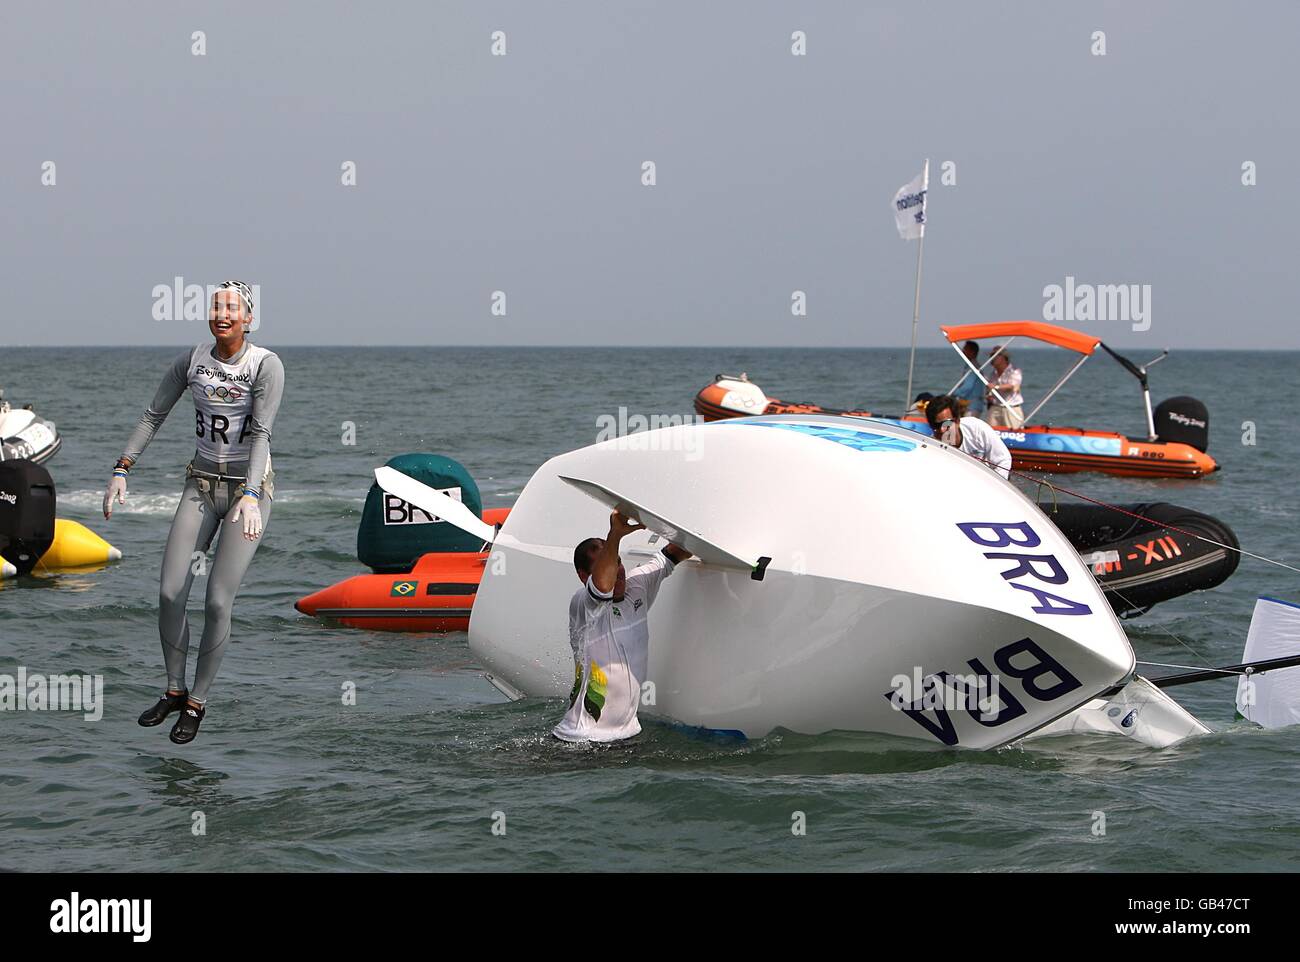 Brazil's Fernanda Oliveira and Isabel Swan bail into the water after their boat capsizes as they celebrate winning their final class race of the Women's 470 class during the 2008 Beijing Olympic Games' Sailing Centre in Qingdao, China. Stock Photo